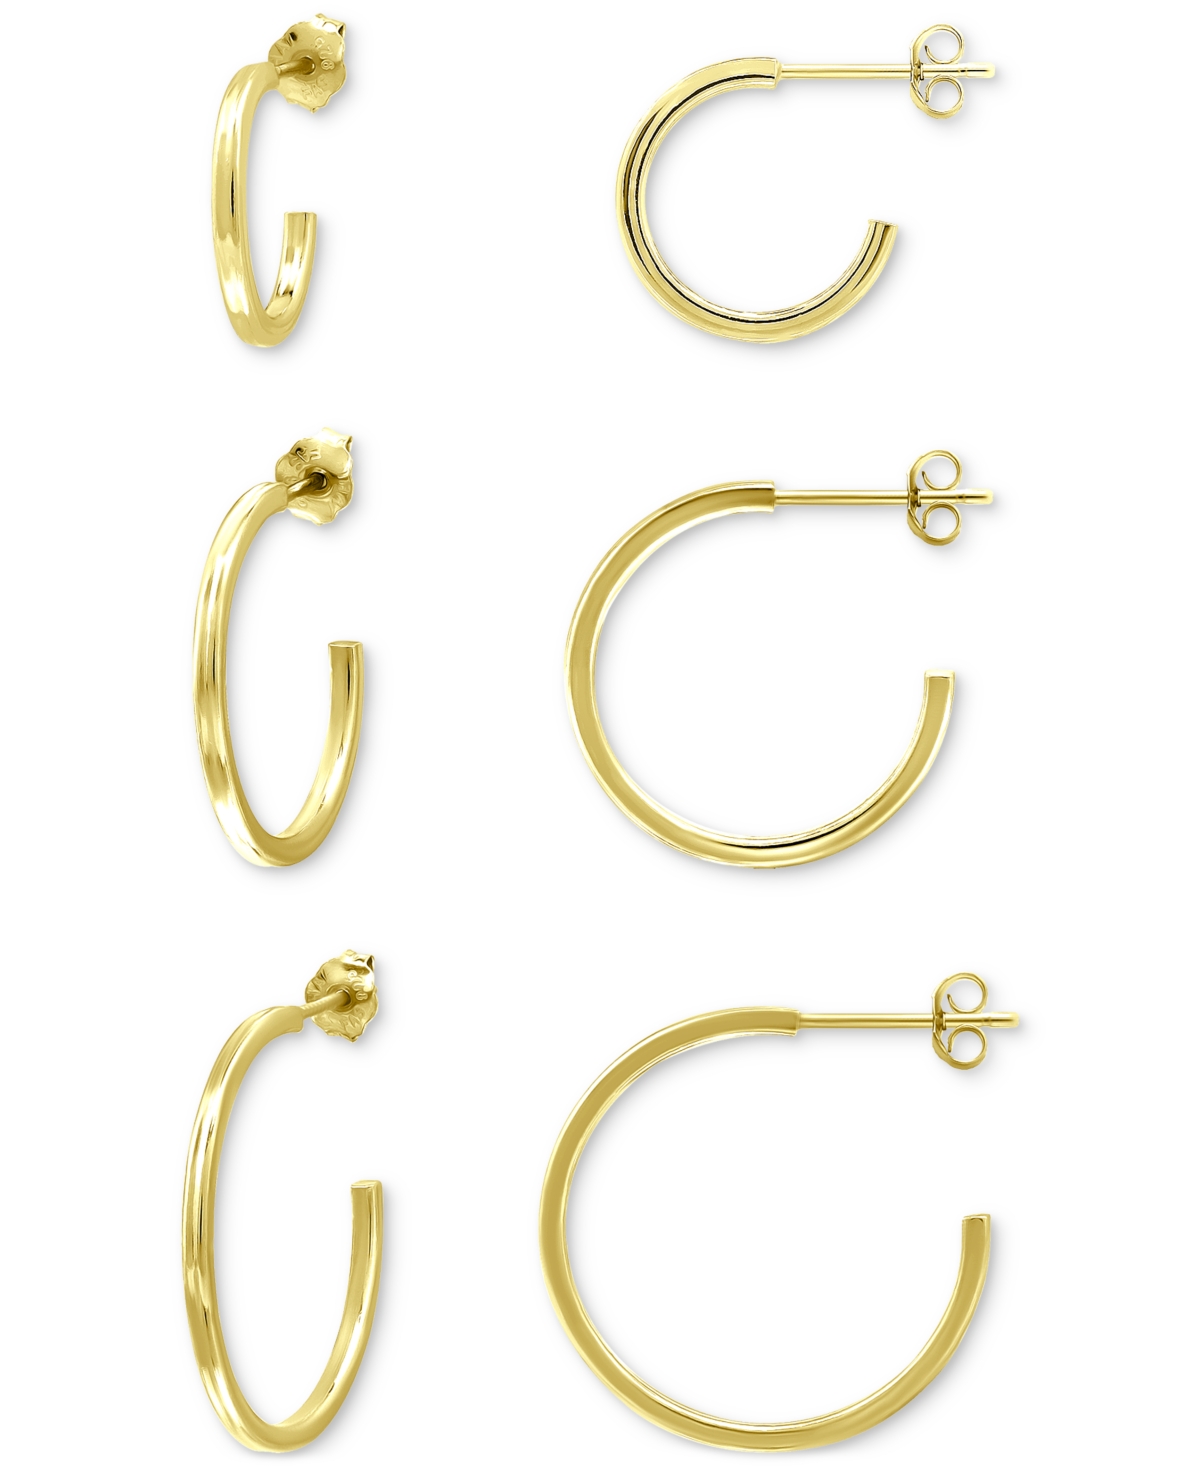 Giani Bernini 3-pc. Set Graduated Hoop Earrings, Created For Macy's In Gold Over Silver